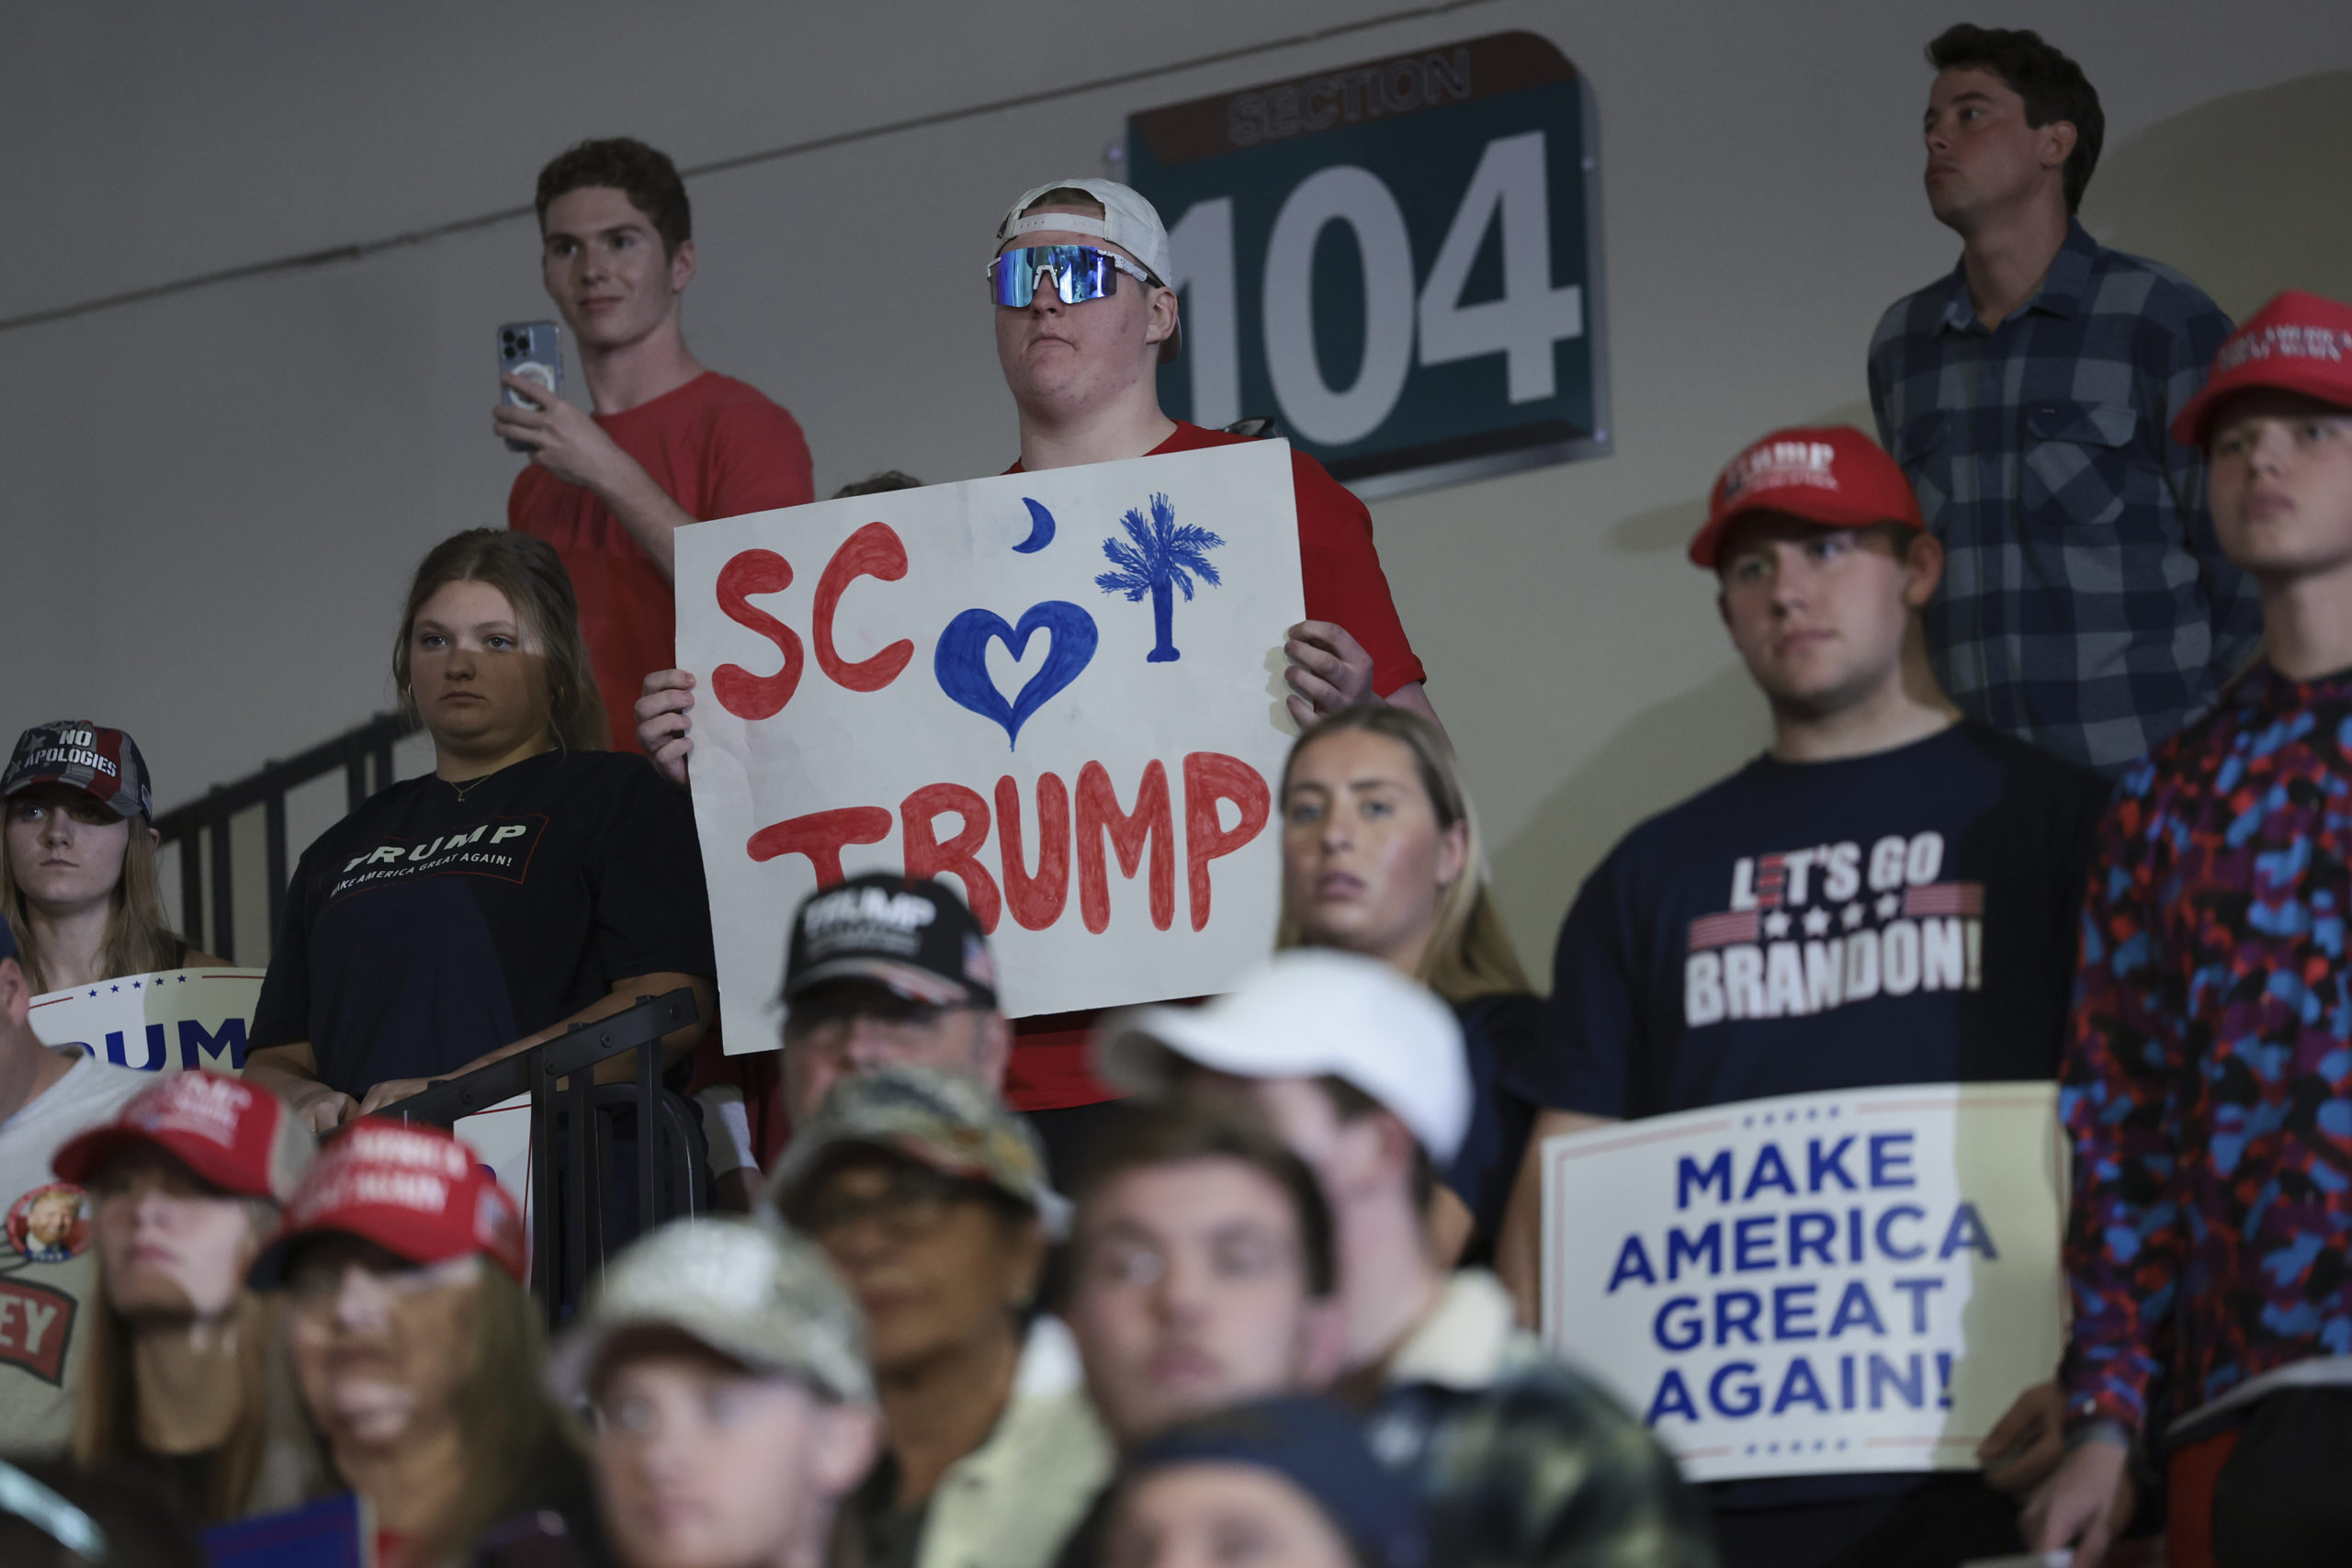 CONWAY, SOUTH CAROLINA - FEBRUARY 10: Supporters of Republican presidential candidate and former President Donald Trump listen while he speaks during a Get Out The Vote rally at Coastal Carolina University on February 10, 2024 in Conway, South Carolina. South Carolina holds its Republican primary on February 24. (Photo by Win McNamee/Getty Images)